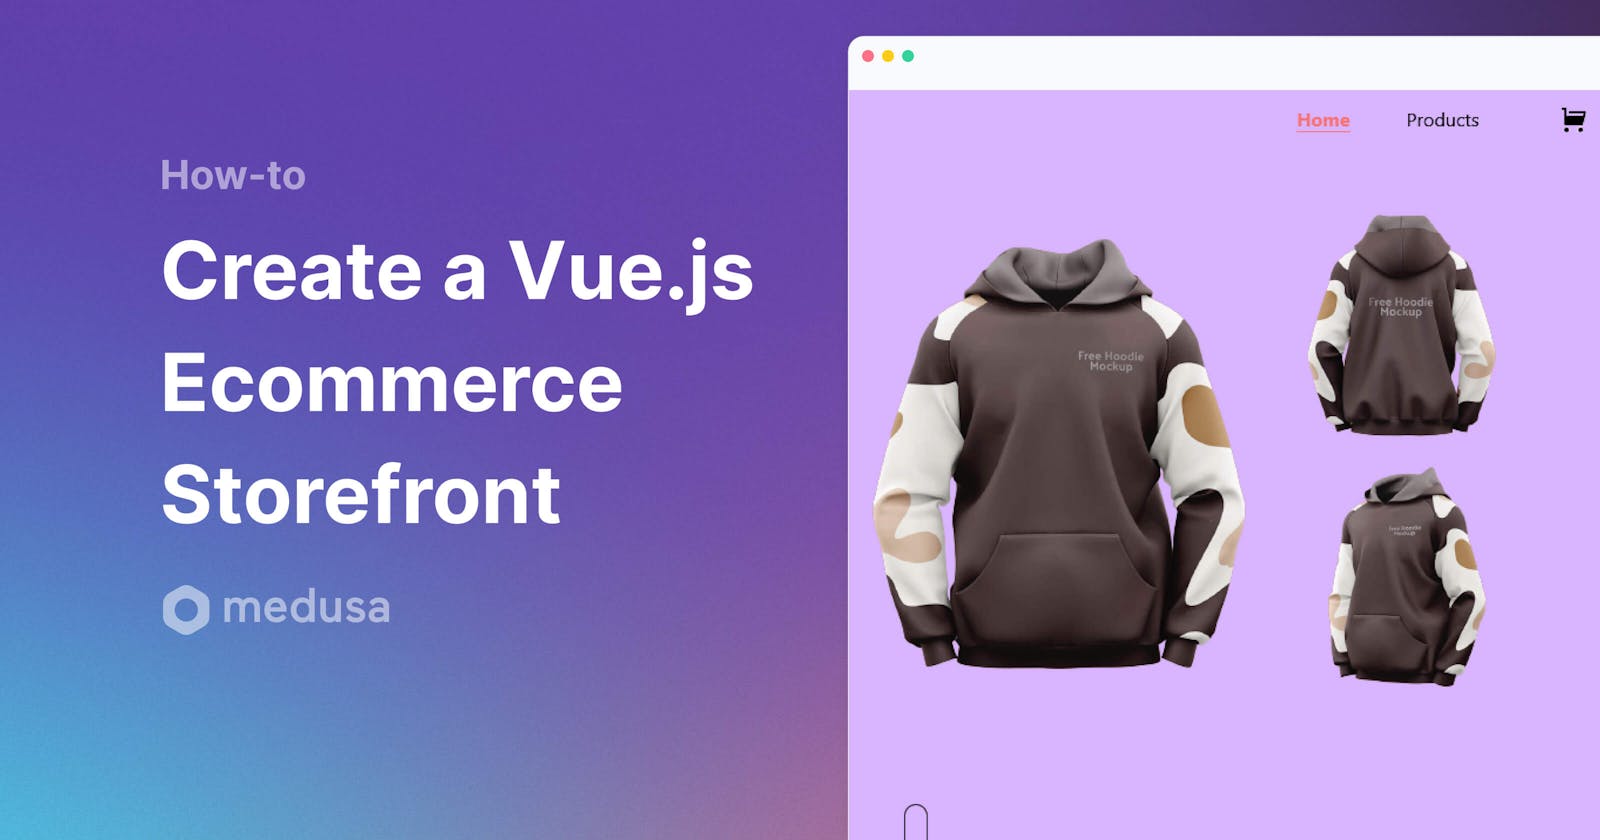 How I Created a Vue.js Ecommerce Store with Medusa